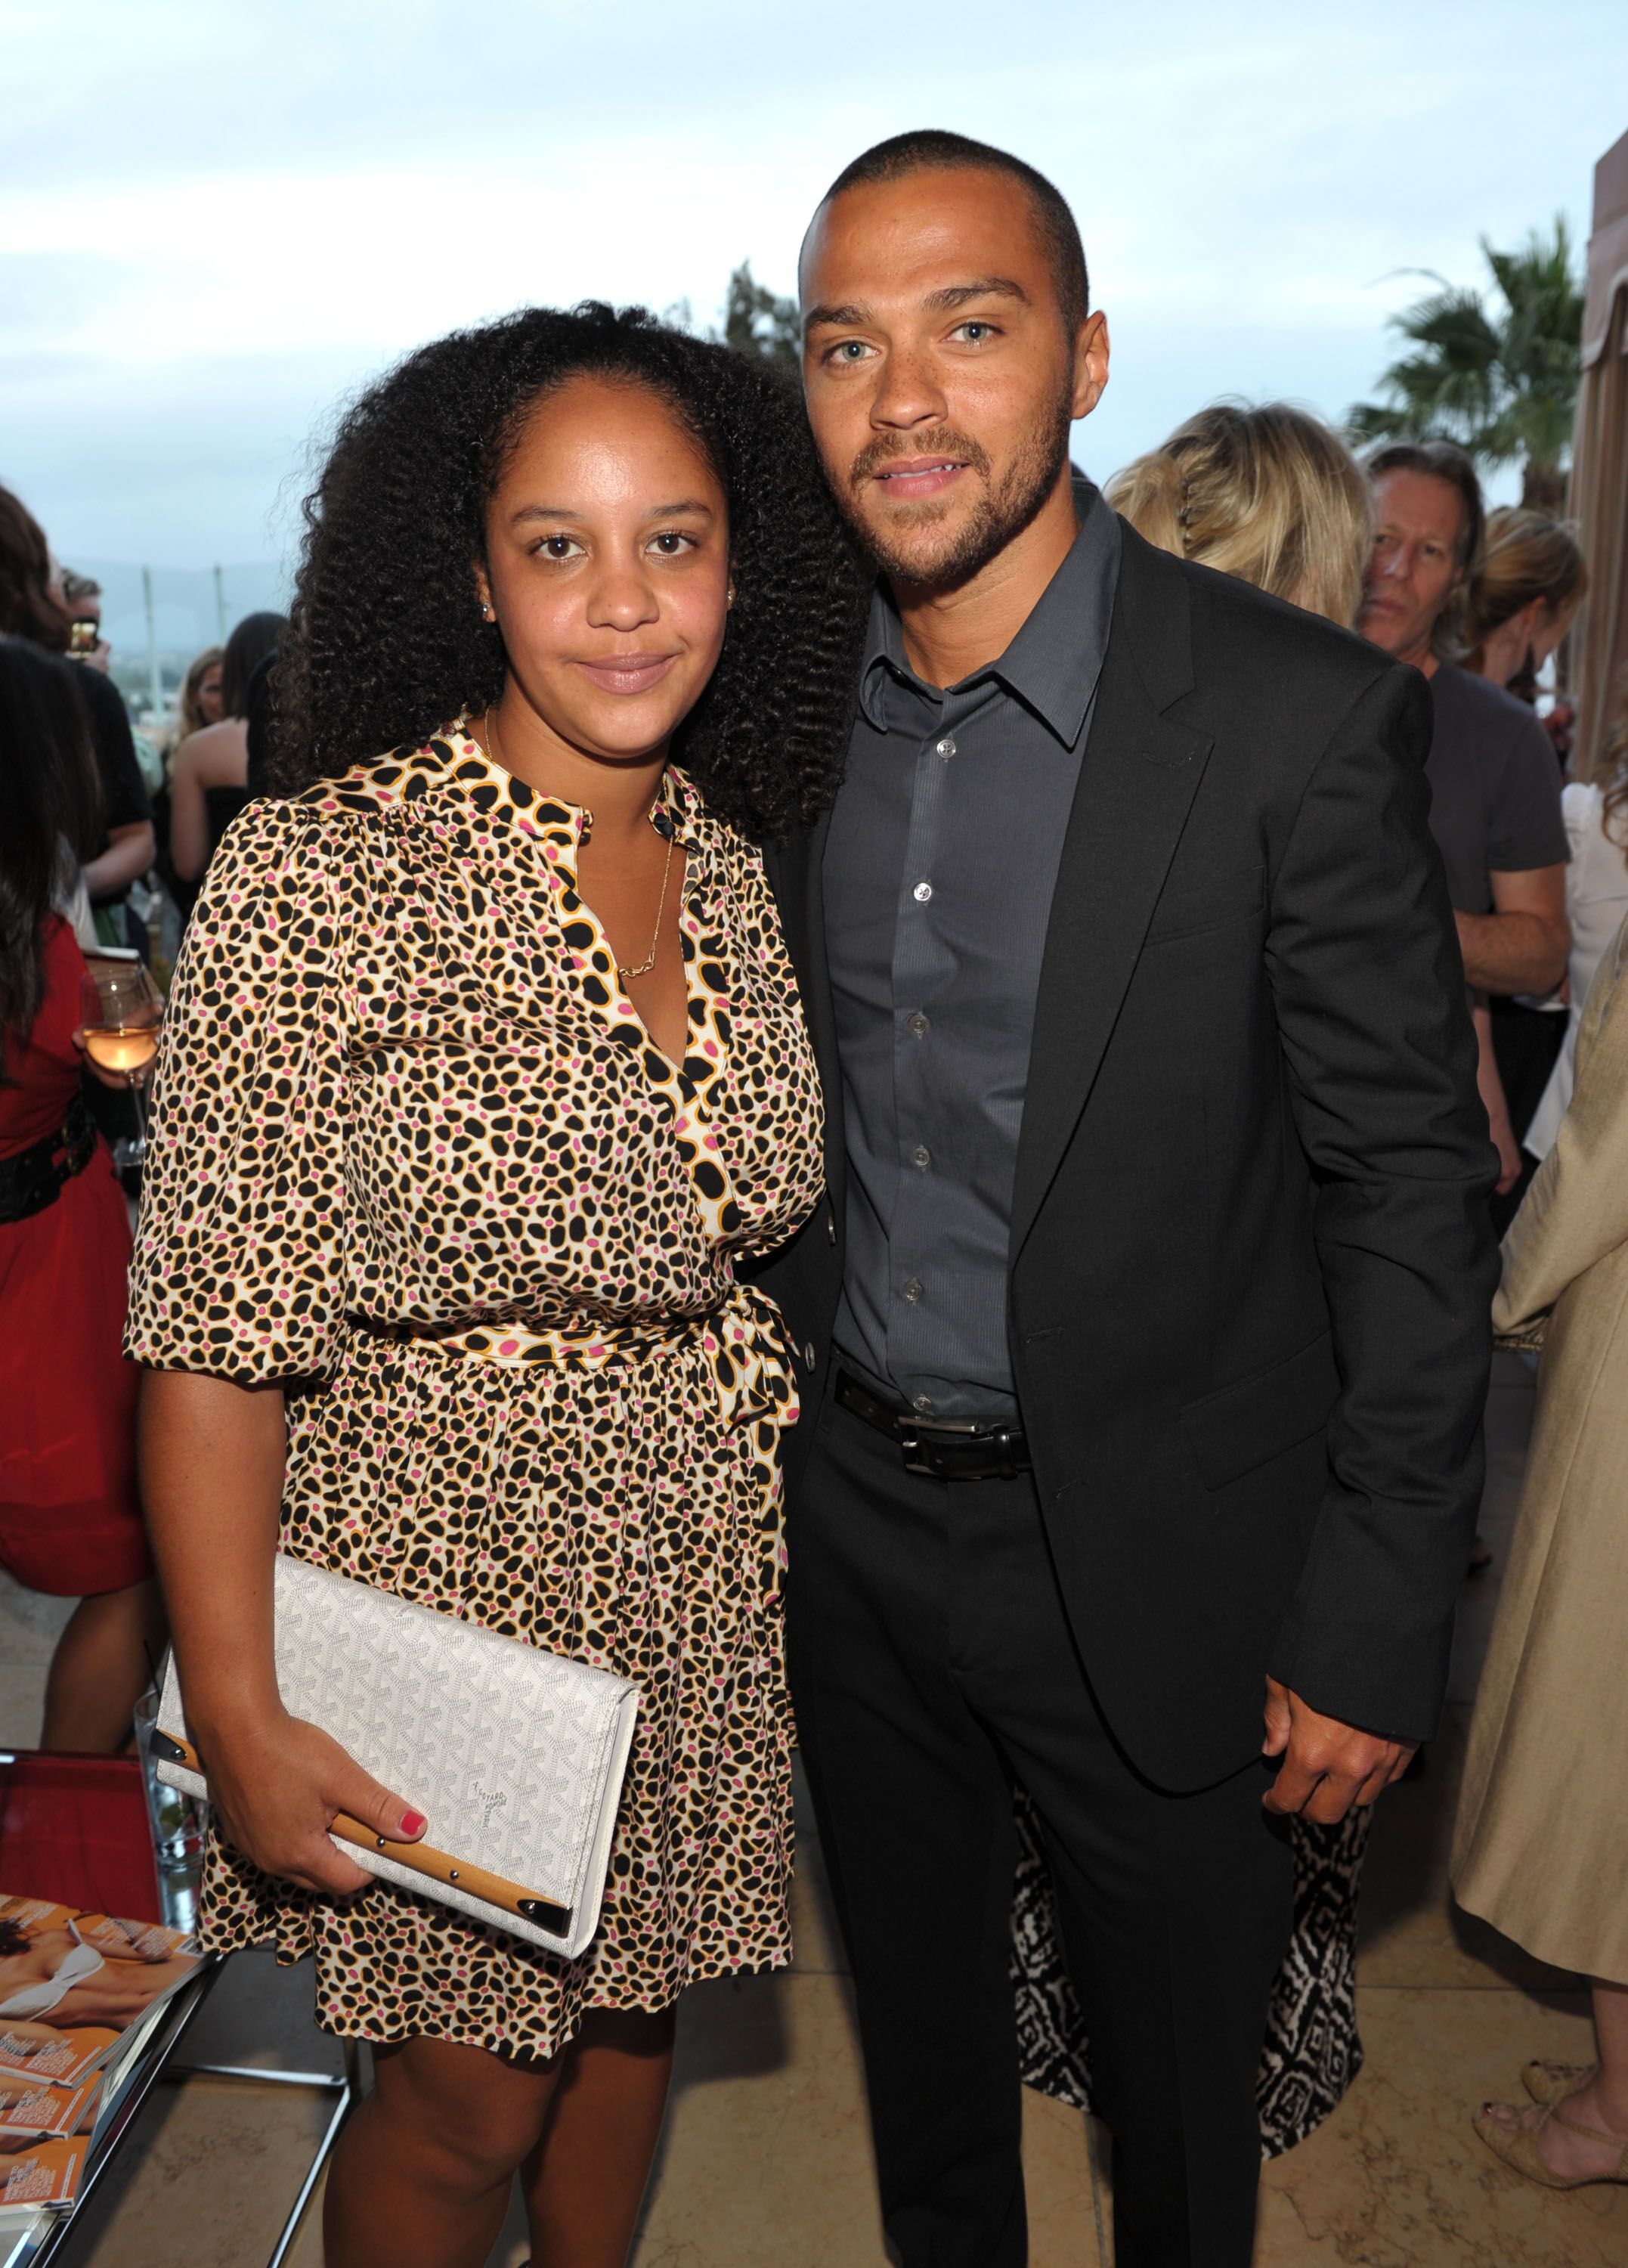 "Gey's Anatomy" star Jesse WIlliams with ex-wife, Aryn Drake-Lee at the "GQ, Nautica, and Oceana World Oceans Day Party" in 2010 | Photo: Getty Images